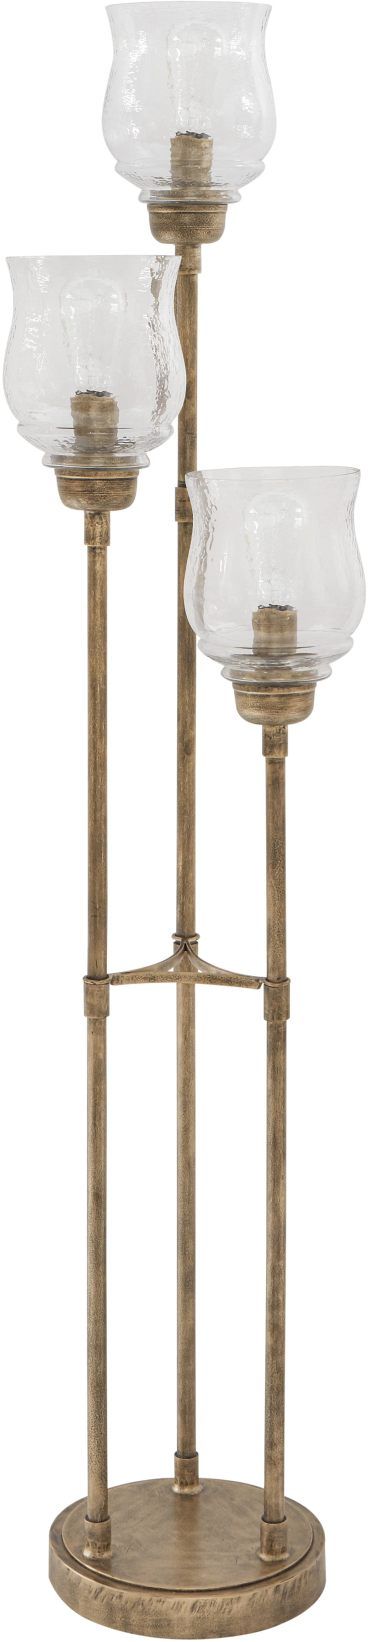 Signature Design by Ashley® Emmie Antique Gold Finish Floor Lamp-0